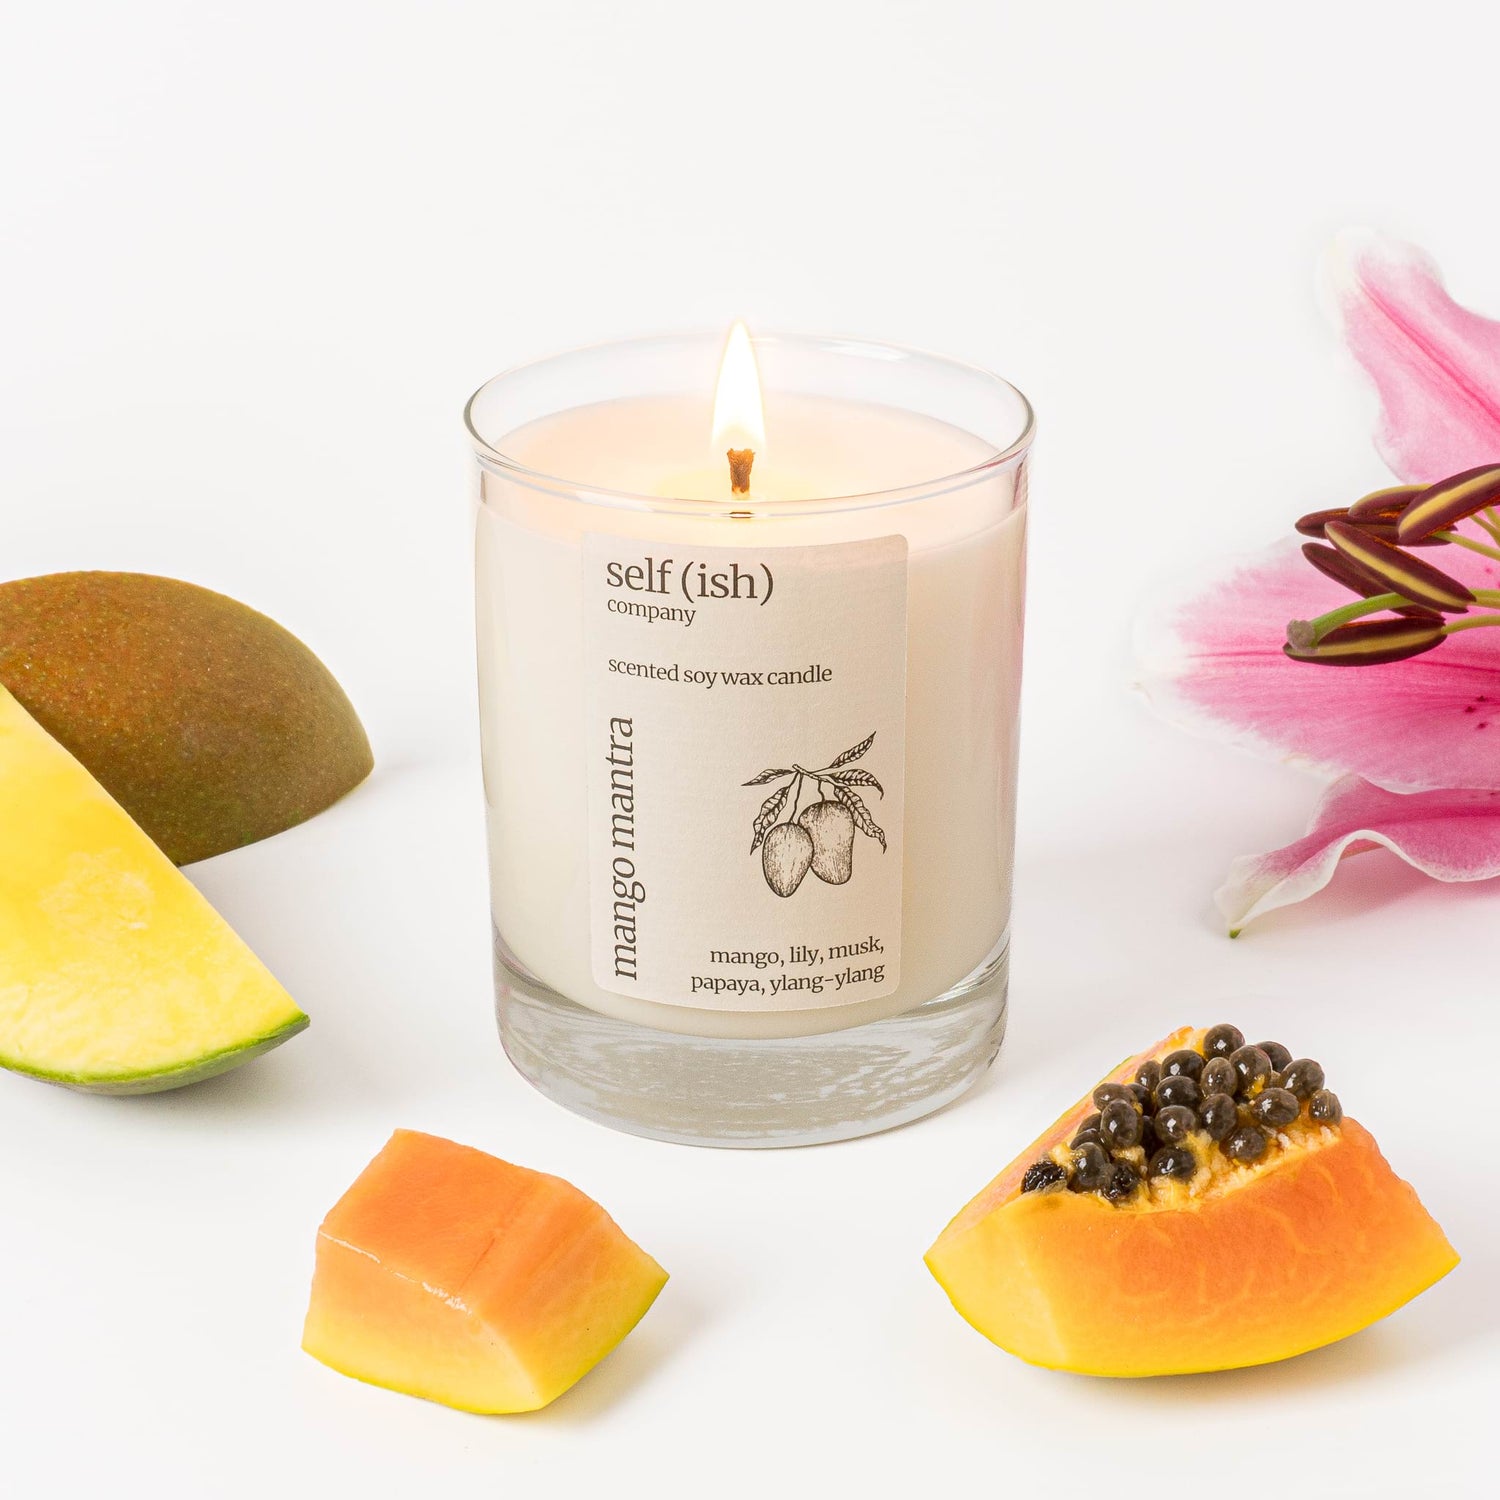 burning soy candle in clear glass container with mango papaya and lily